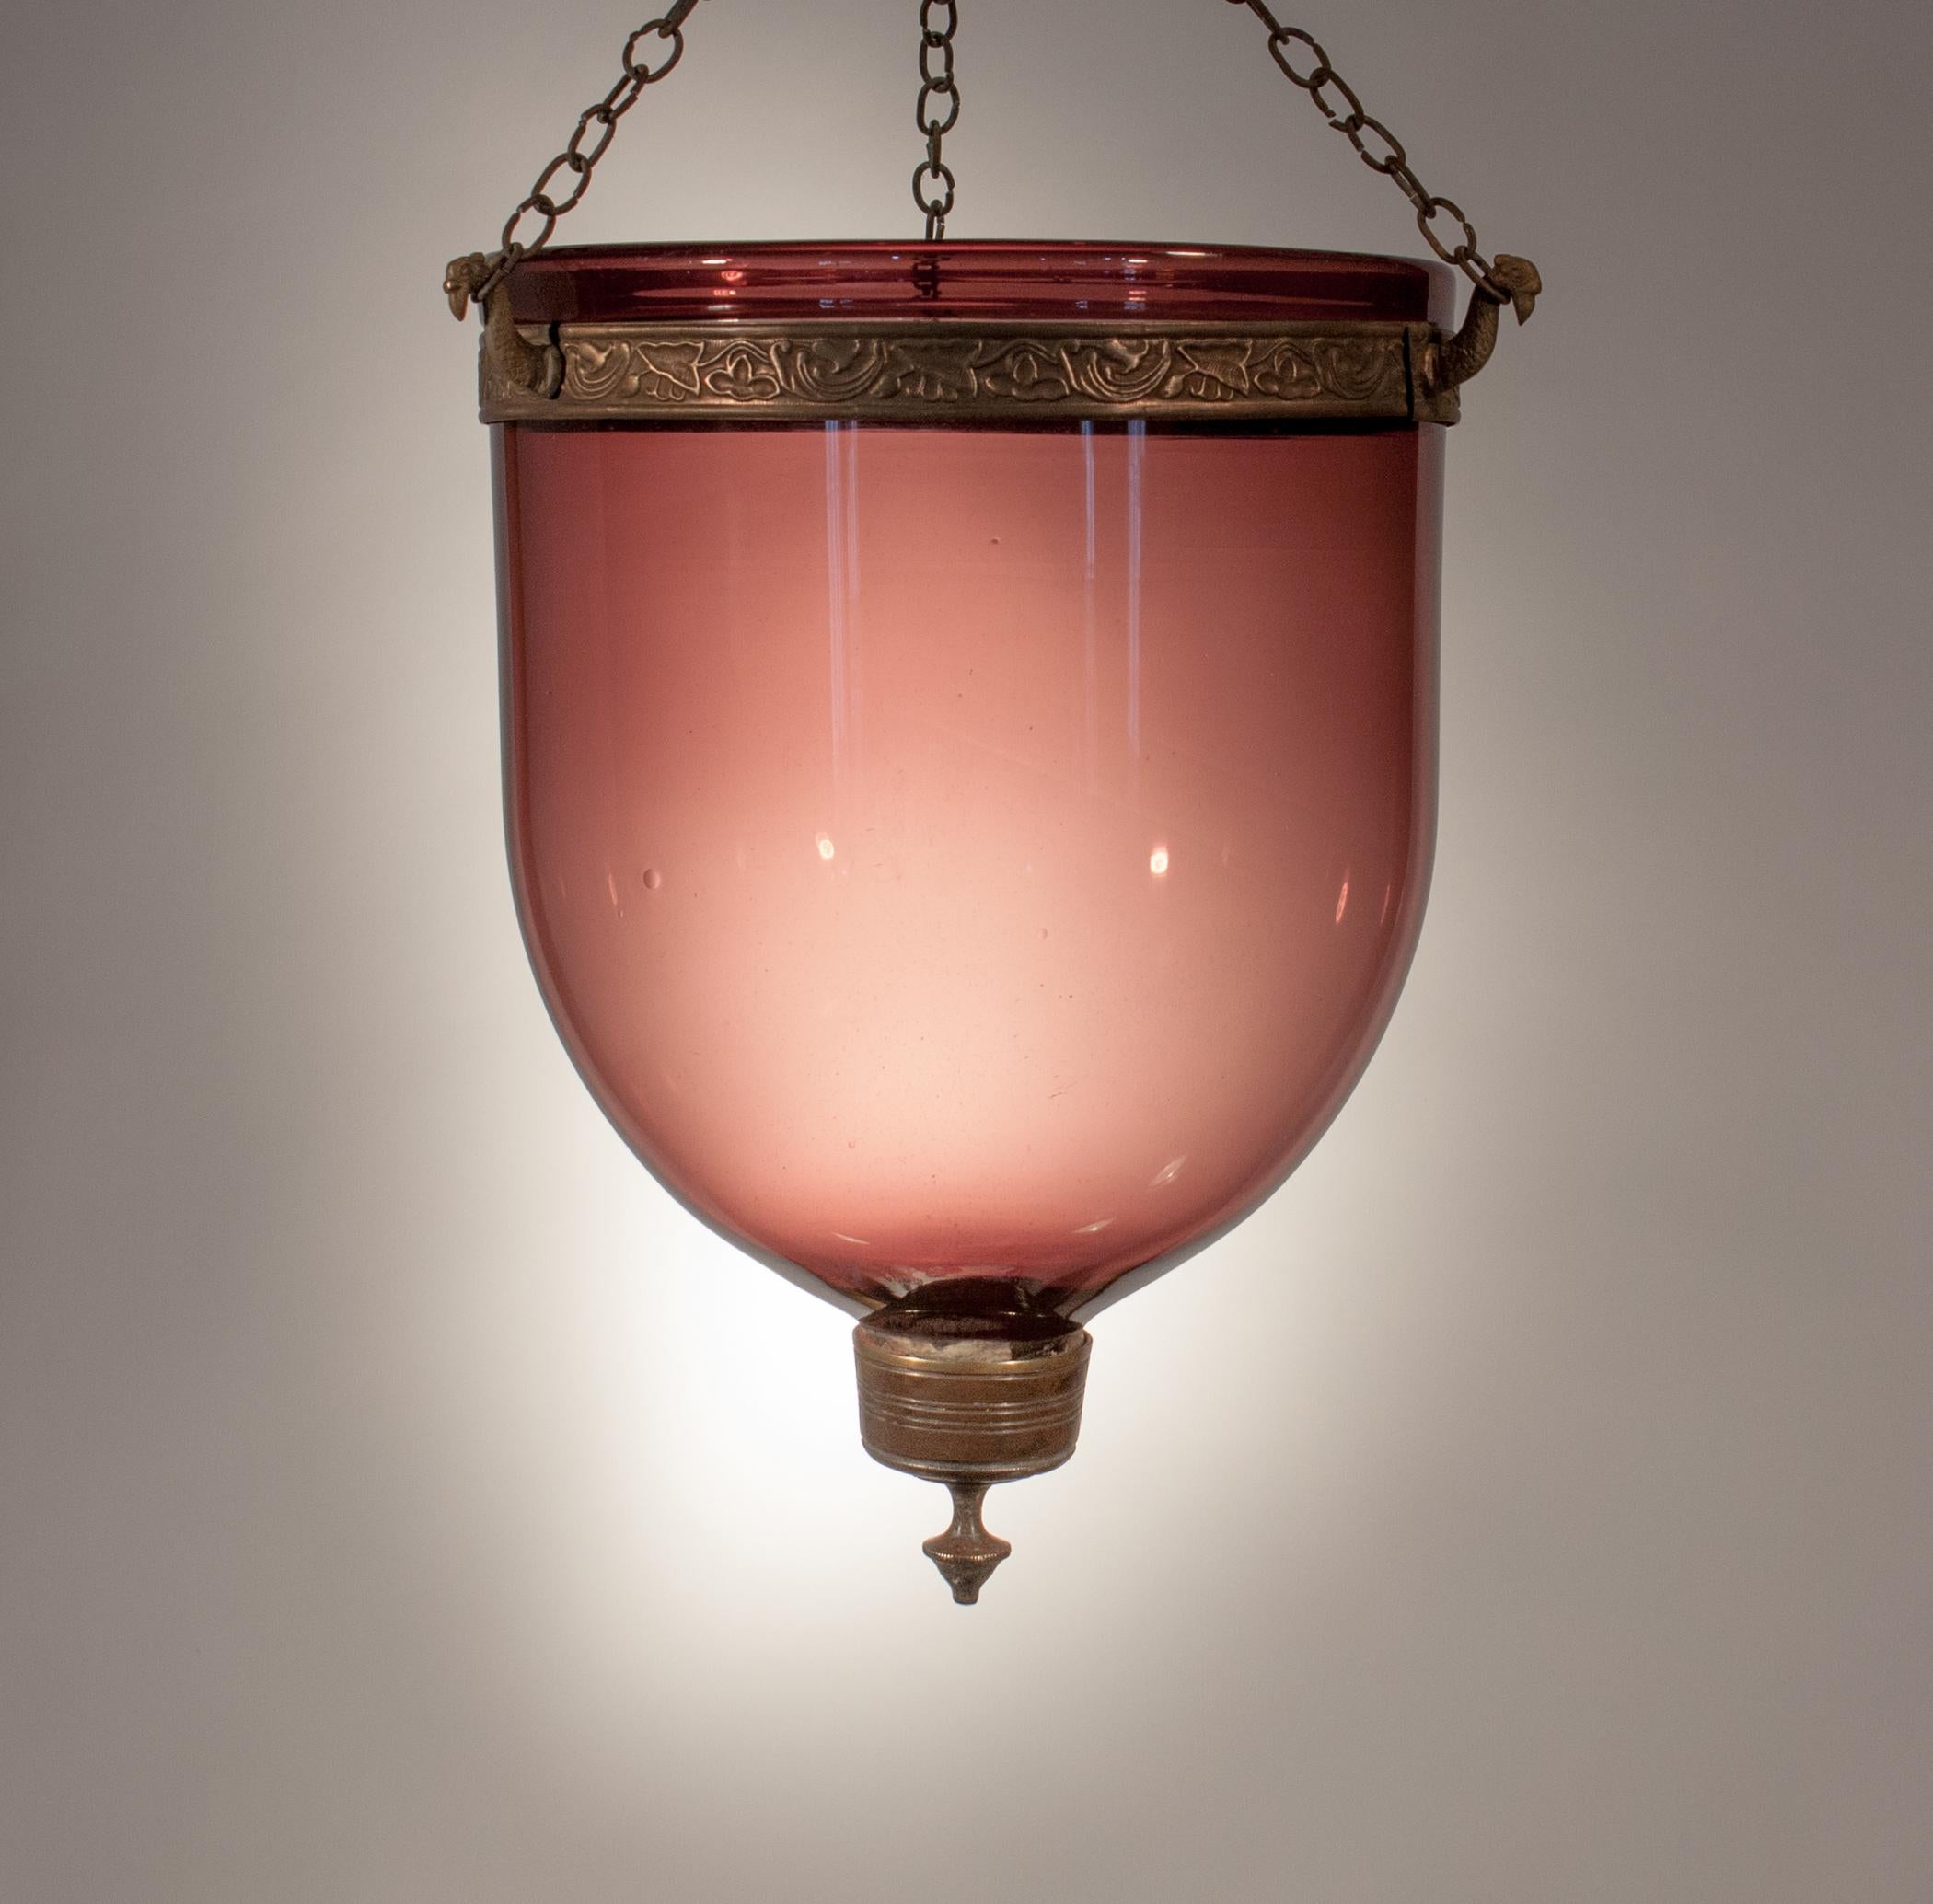 19th Century Bell Jar Lantern with Amethyst Colored Glass 4